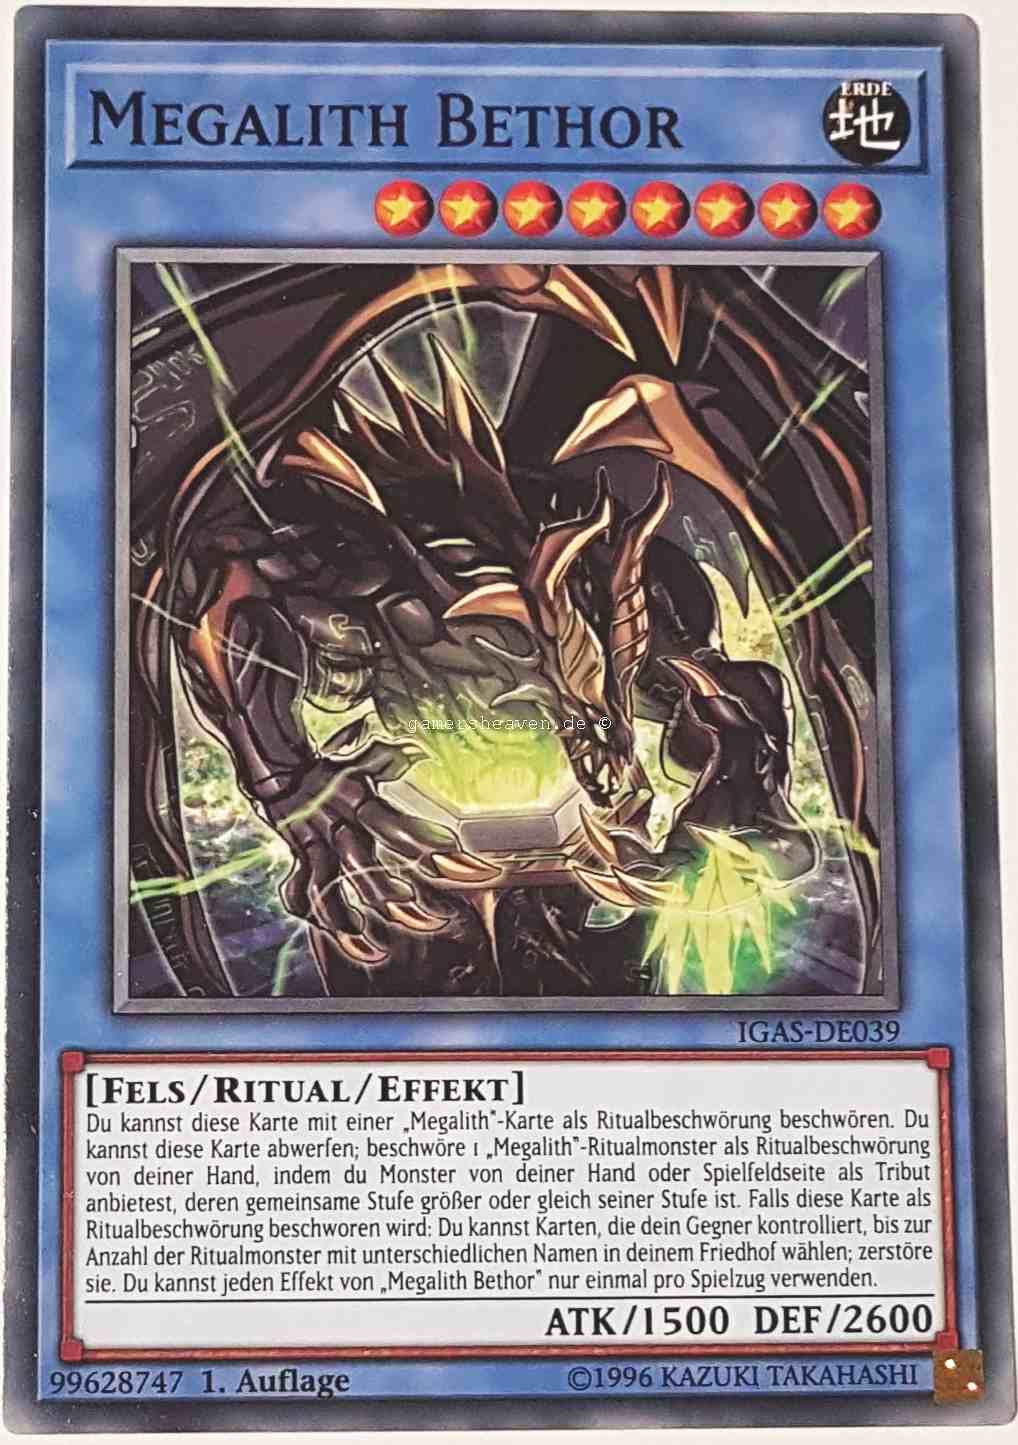 Megalith Bethor IGAS-DE039 ist in Common Yu-Gi-Oh Karte aus Ignition Assault 1.Auflage